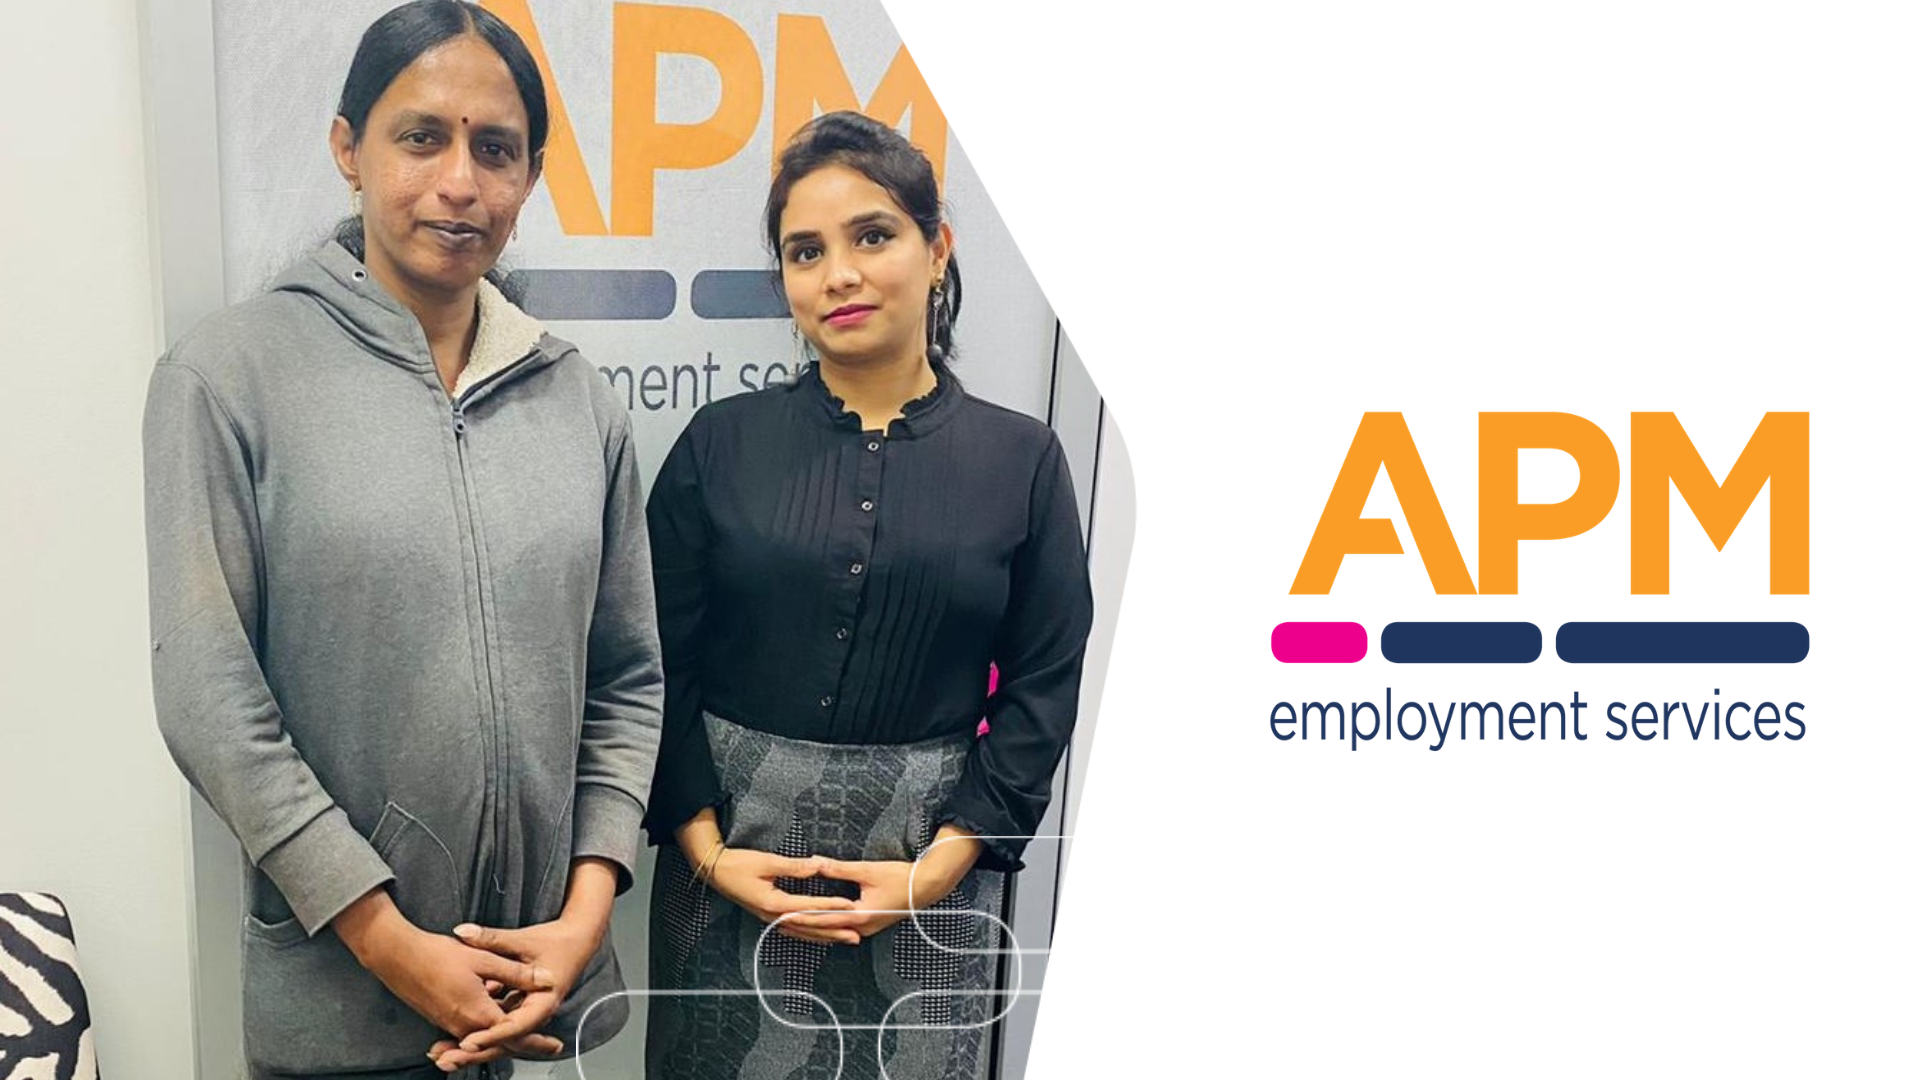 Anita and Harpreet standing together in front of the APM Burwood office